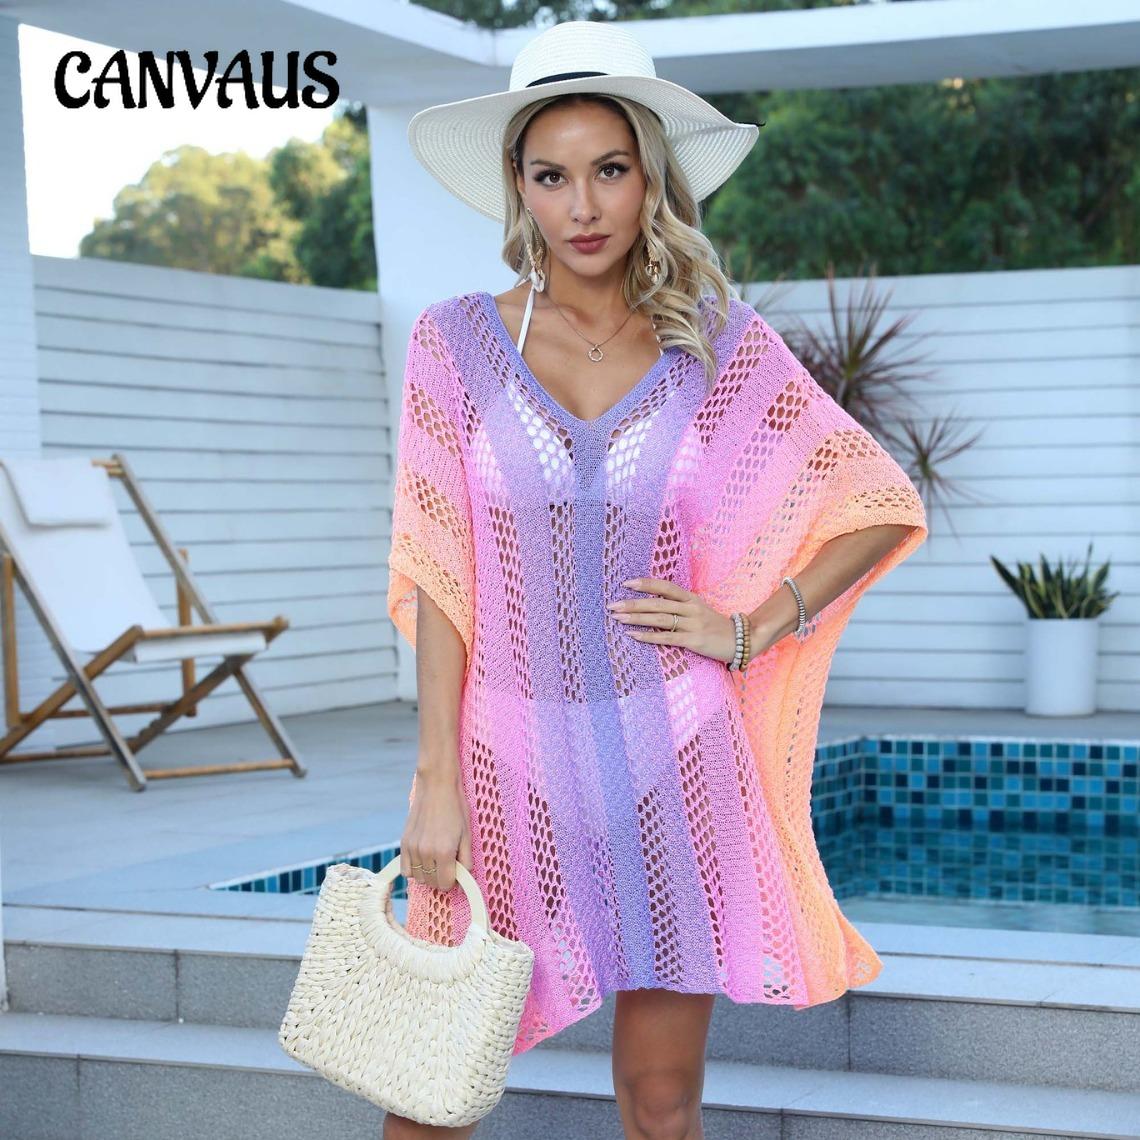 CANVAUS Plus Size Women's Cover-Ups Beach Vacation Hollow Out Loose Casual Bikini Dress Beach Swimwear Cover-Ups